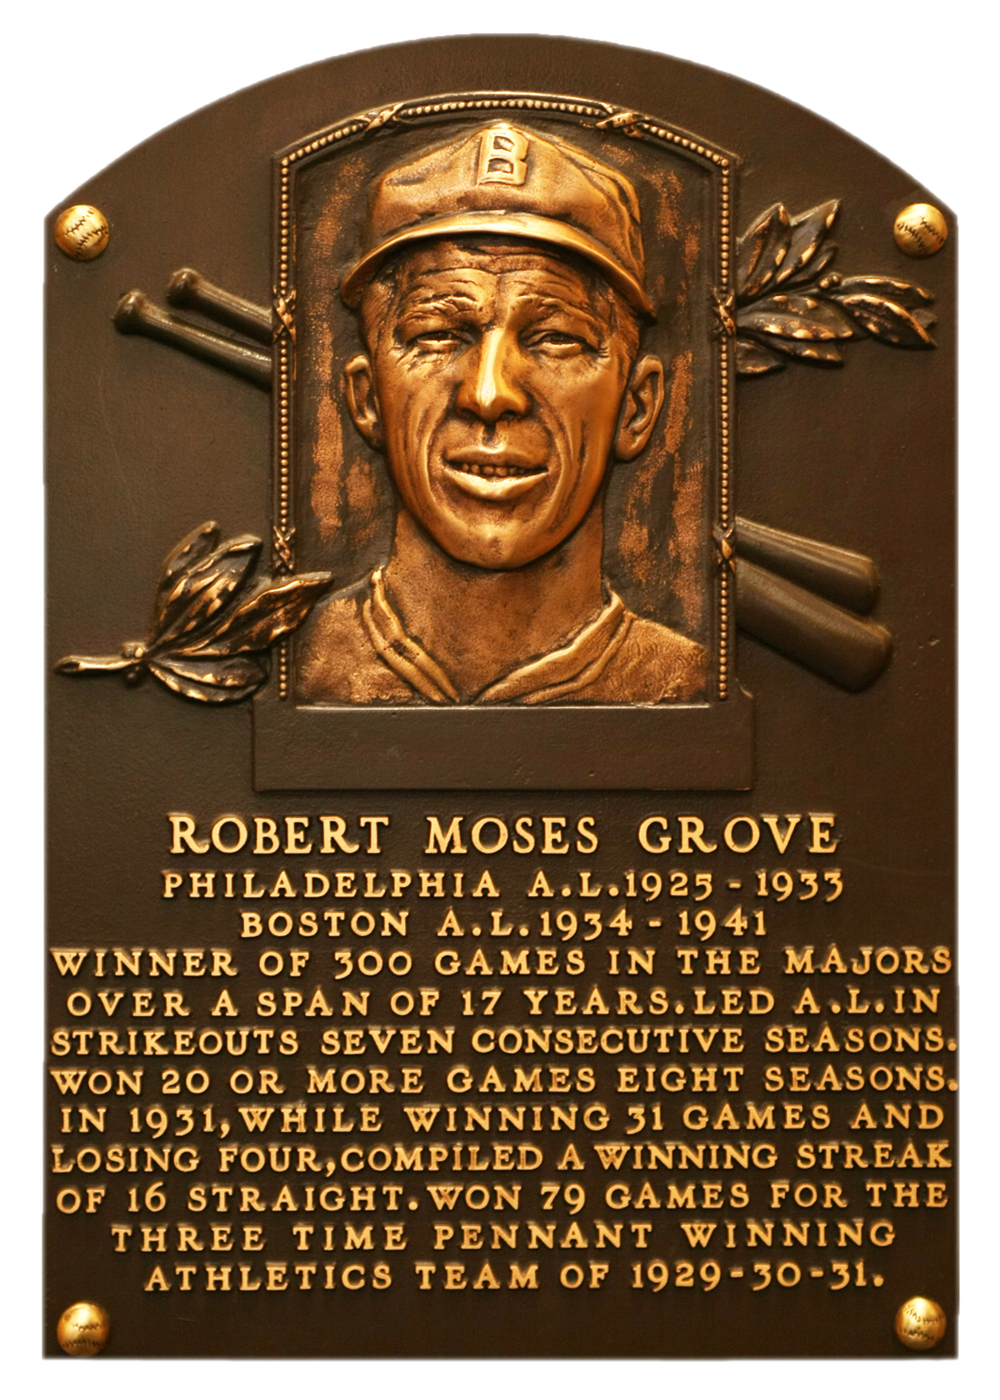 Lefty Grove Hall of Fame plaque